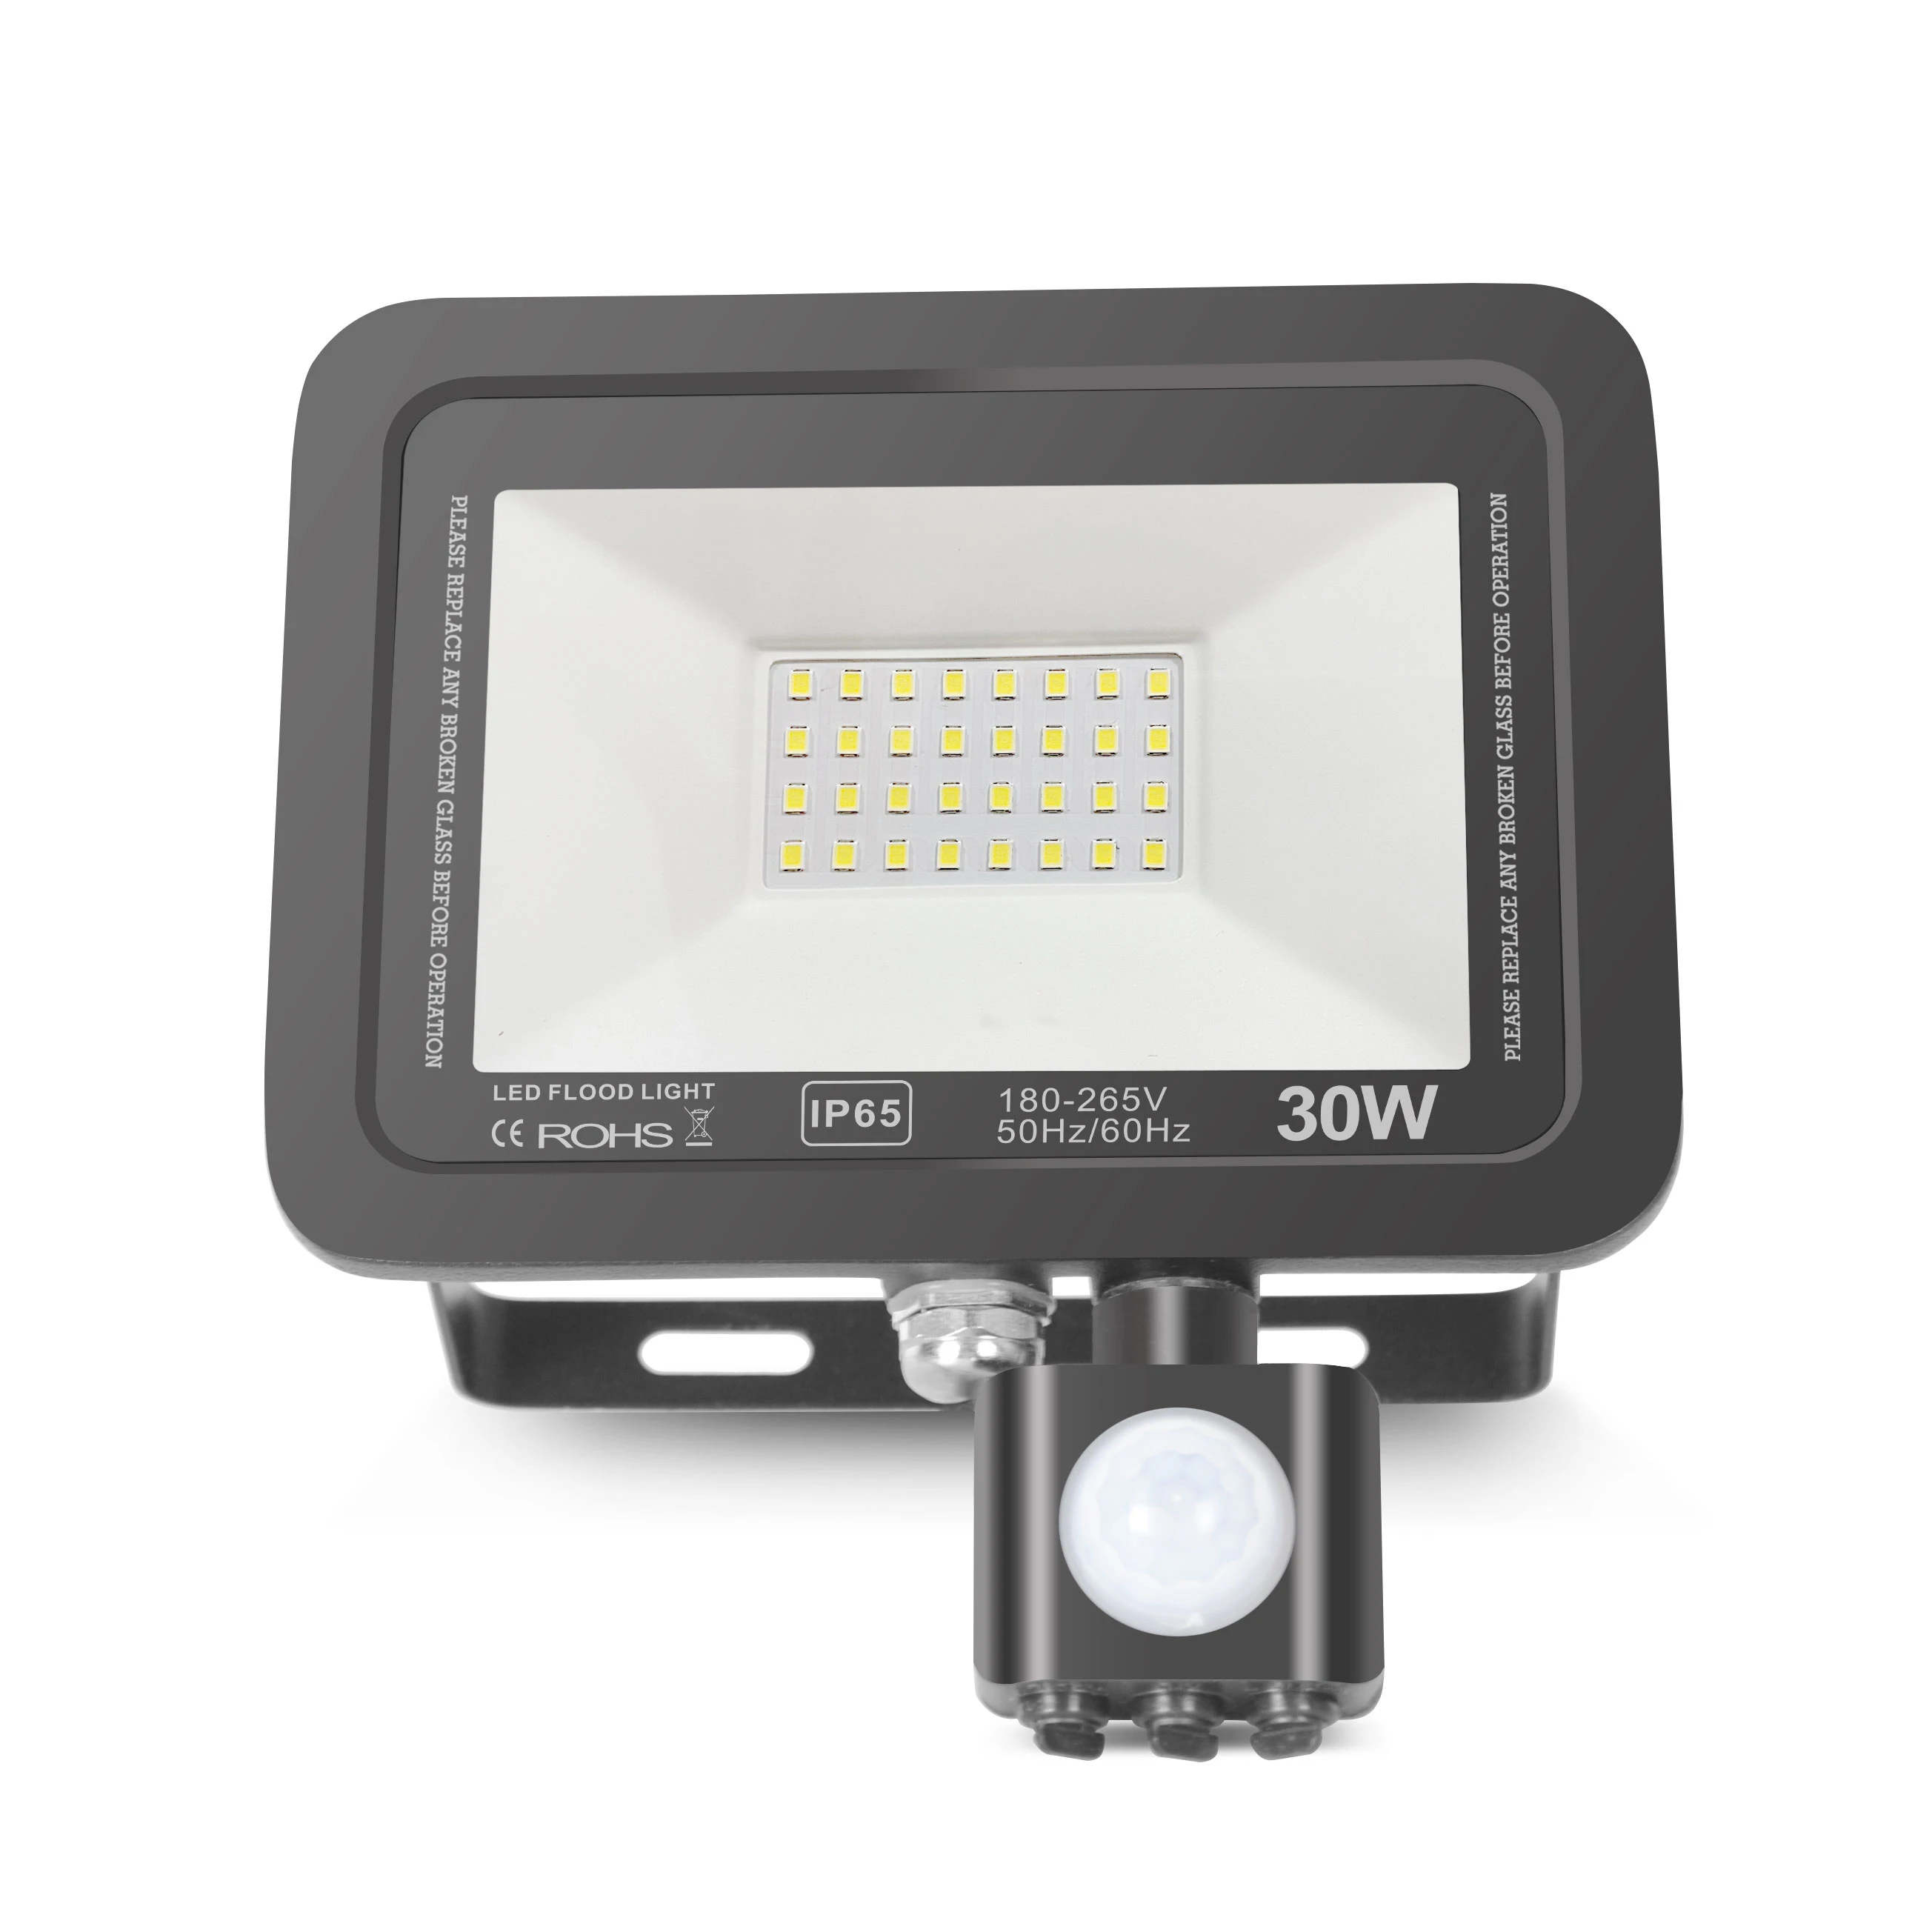 Led Motion Sensor Flood Light Outdoor 30W Waterproof Security Floodlight Wall Fixture Lamps for Garage Yard Pathway